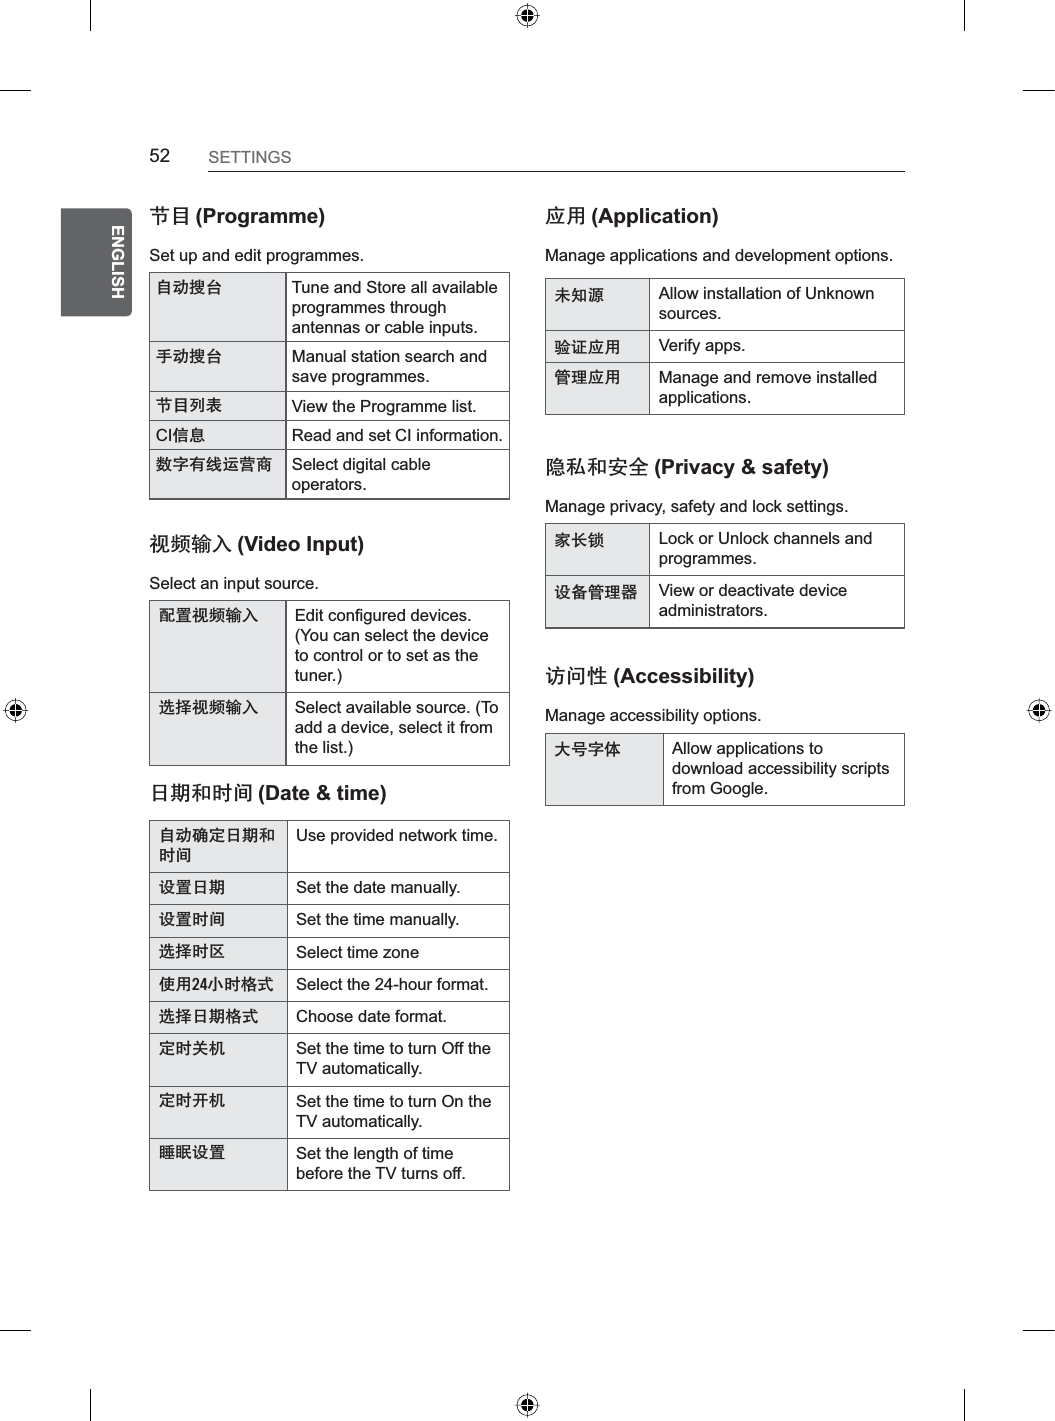 52ENGENGLISHSETTINGS䆉㗵 (Programme)Set up and edit programmes.䂽ᅻ⋯ዃ Tune and Store all available programmes through antennas or cable inputs.℞ᅻ⋯ዃ Manual station search and save programmes.䅕㗁ც䜻 View the Programme list.CIິὂ Read and set CI information.⑃ᨪ◜㶒亣䋸ᐙ Select digital cable operators.䣍垘亚ၬ (Video Input)Select an input source.倠㹁䢙坤书း Edit configured devices.(You can select the device to control or to set as the tuner.) 仜↼䢙坤书း Select available source. (To add a device, select it from the list.)⓬☦᎓⓽哻 (Date &amp; time)䃱ᆯ㝵᪡⓬☦᎓⓽哻Use provided network time.䫅㹵⓬☦ Set the date manually.䫅㹵⓽哻 Set the time manually.伐⇰⓽ቁ Select time zoneຆ㐯ᬖ⓽❃Ḗ Select the 24-hour format.伐⇰⓬☦❃Ḗ Choose date format.᪡⓽ၺ♁ Set the time to turn Off the TV automatically.᪡⓽ḇ♁ Set the time to turn On the TV automatically.㙨㘧䫅㹵 Set the length of time before the TV turns off.ᶛ㐯 (Application)Manage applications and development options.◽㚸ⵣ Allow installation of Unknown sources.奟䪔ᵧ㏻ Verify apps.㩴㋙ᵧ㏻ Manage and remove installed applications.喗㣈᎓᪐ၯ (Privacy &amp; safety)Manage privacy, safety and lock settings.᪉呒叔 Lock or Unlock channels and programmes.䪑៚㩴㋙ᔻ View or deactivate device administrators.䫆哵Ἦ (Accessibility)Manage accessibility options.៺ዊᨪฦ Allow applications to download accessibility scripts from Google.